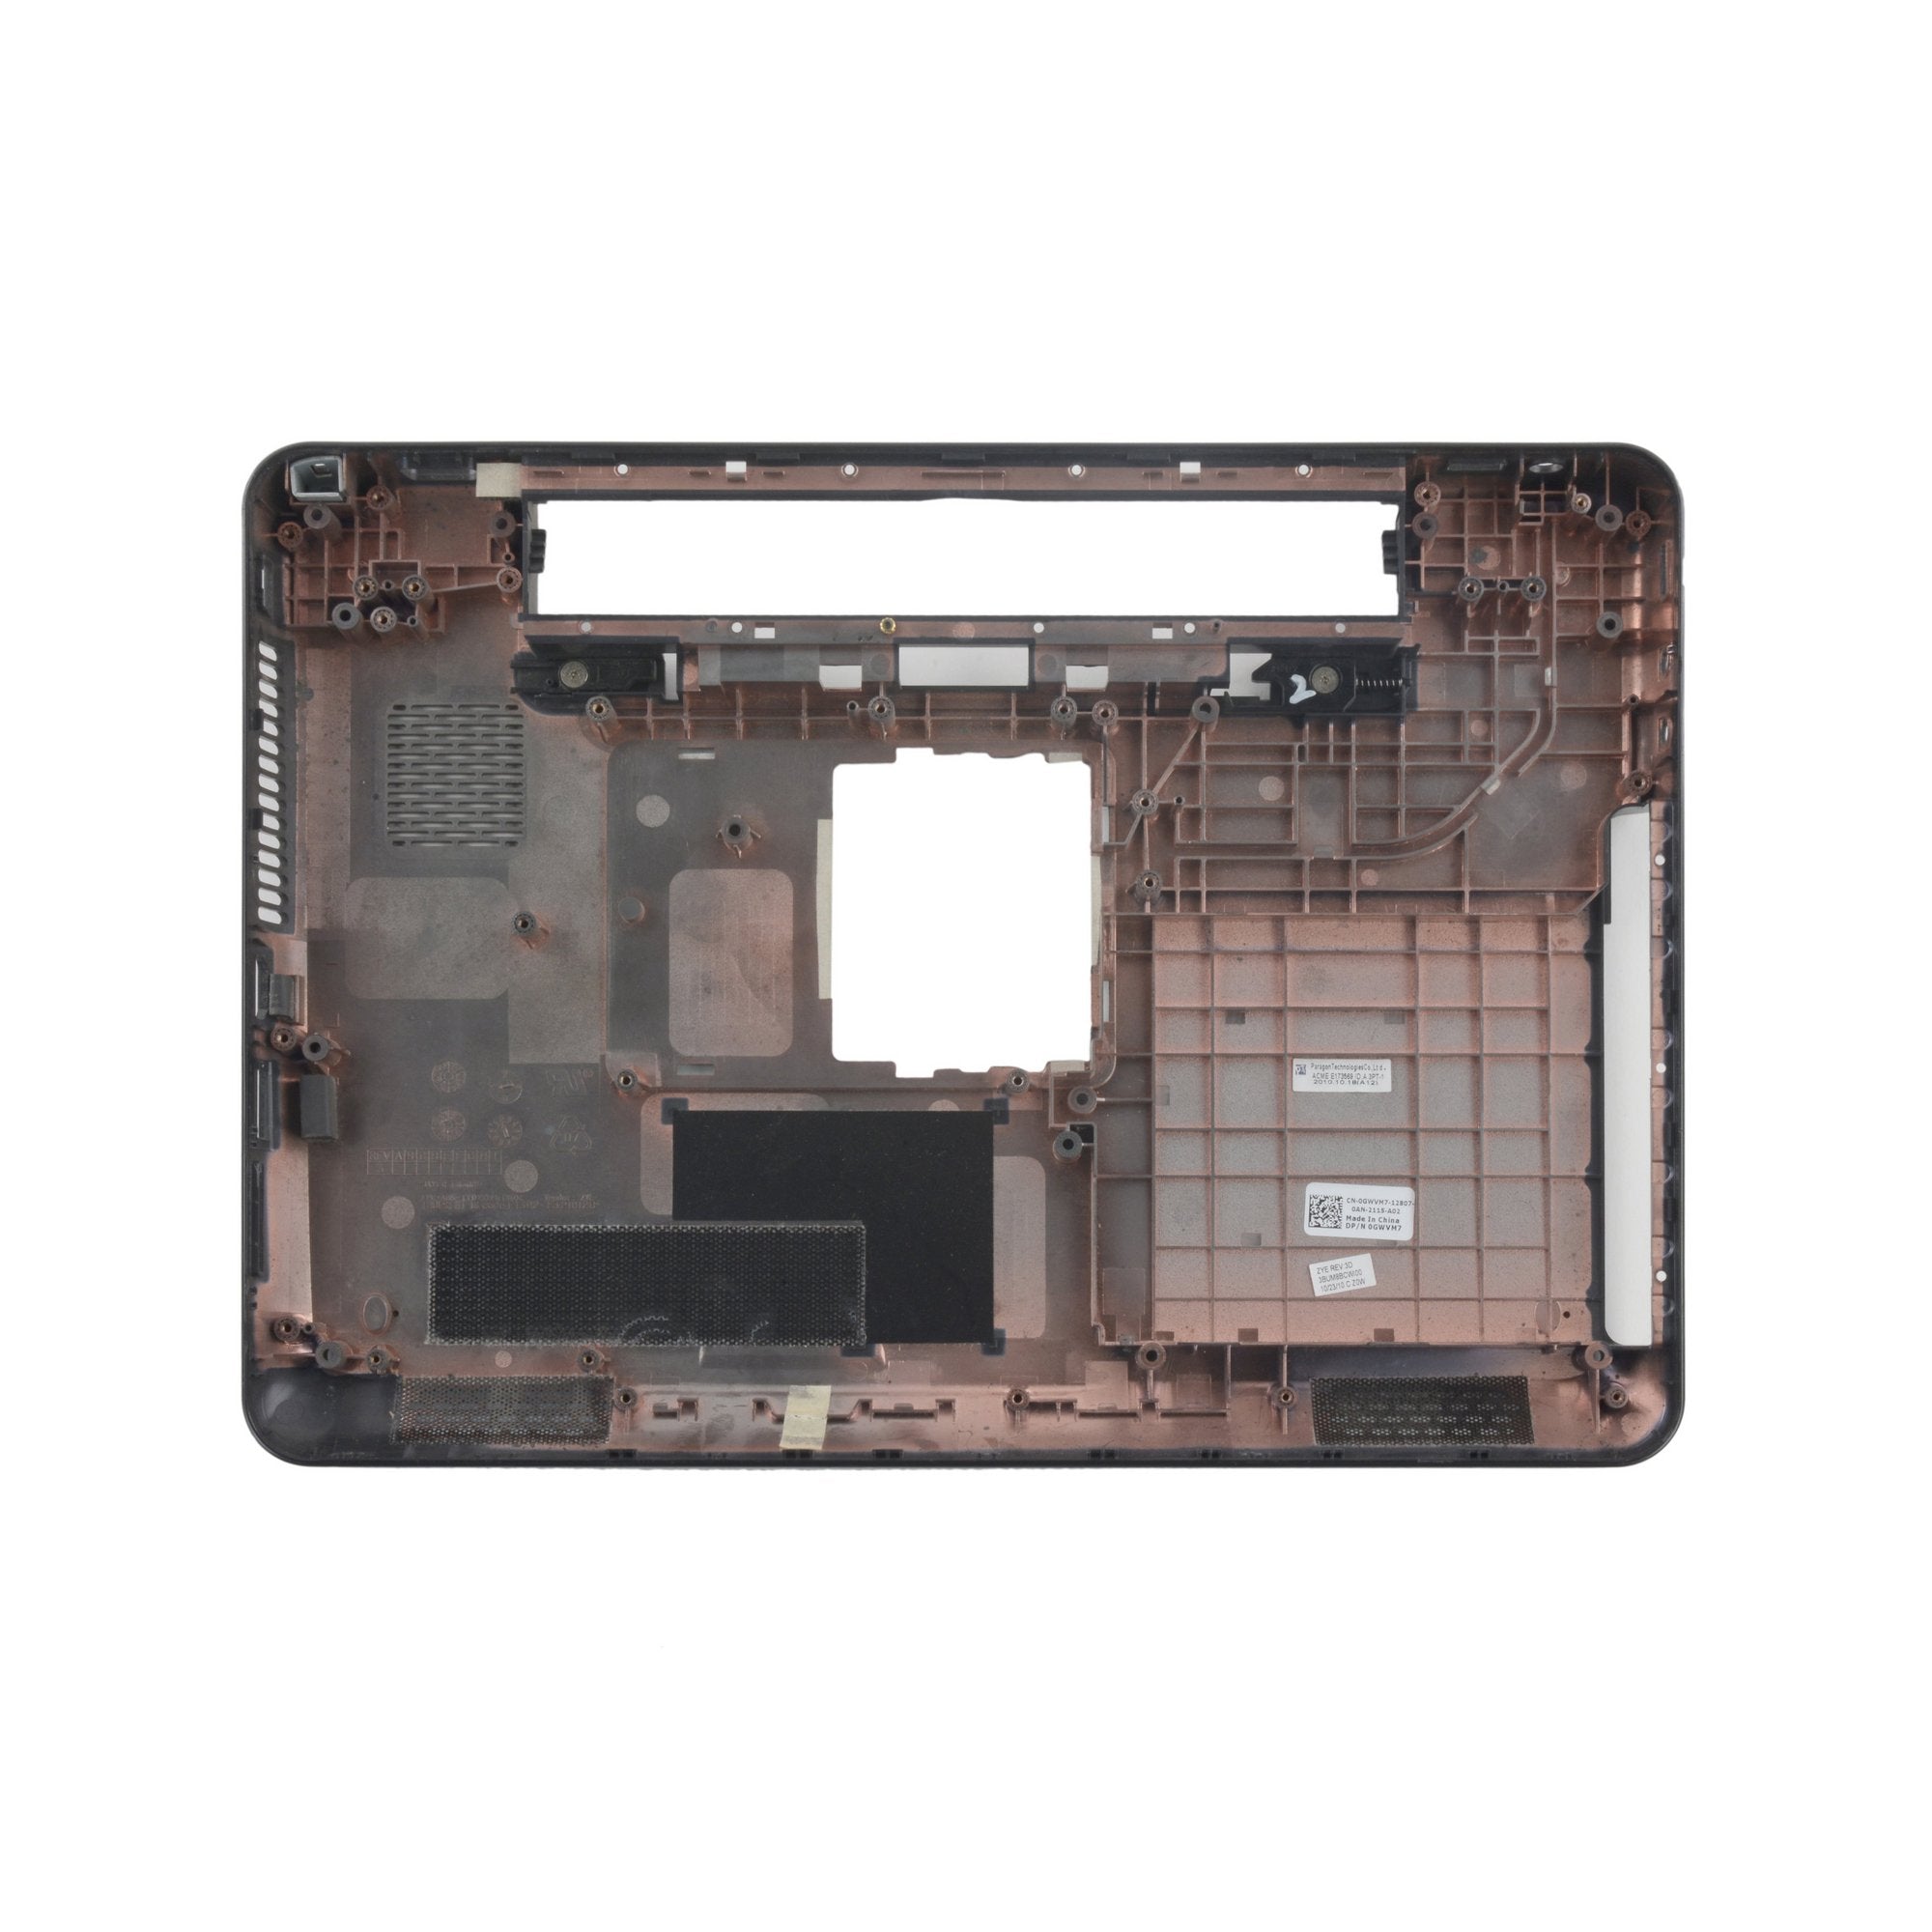 Inspiron 14R (N4010) Lower Case Used, B-Stock